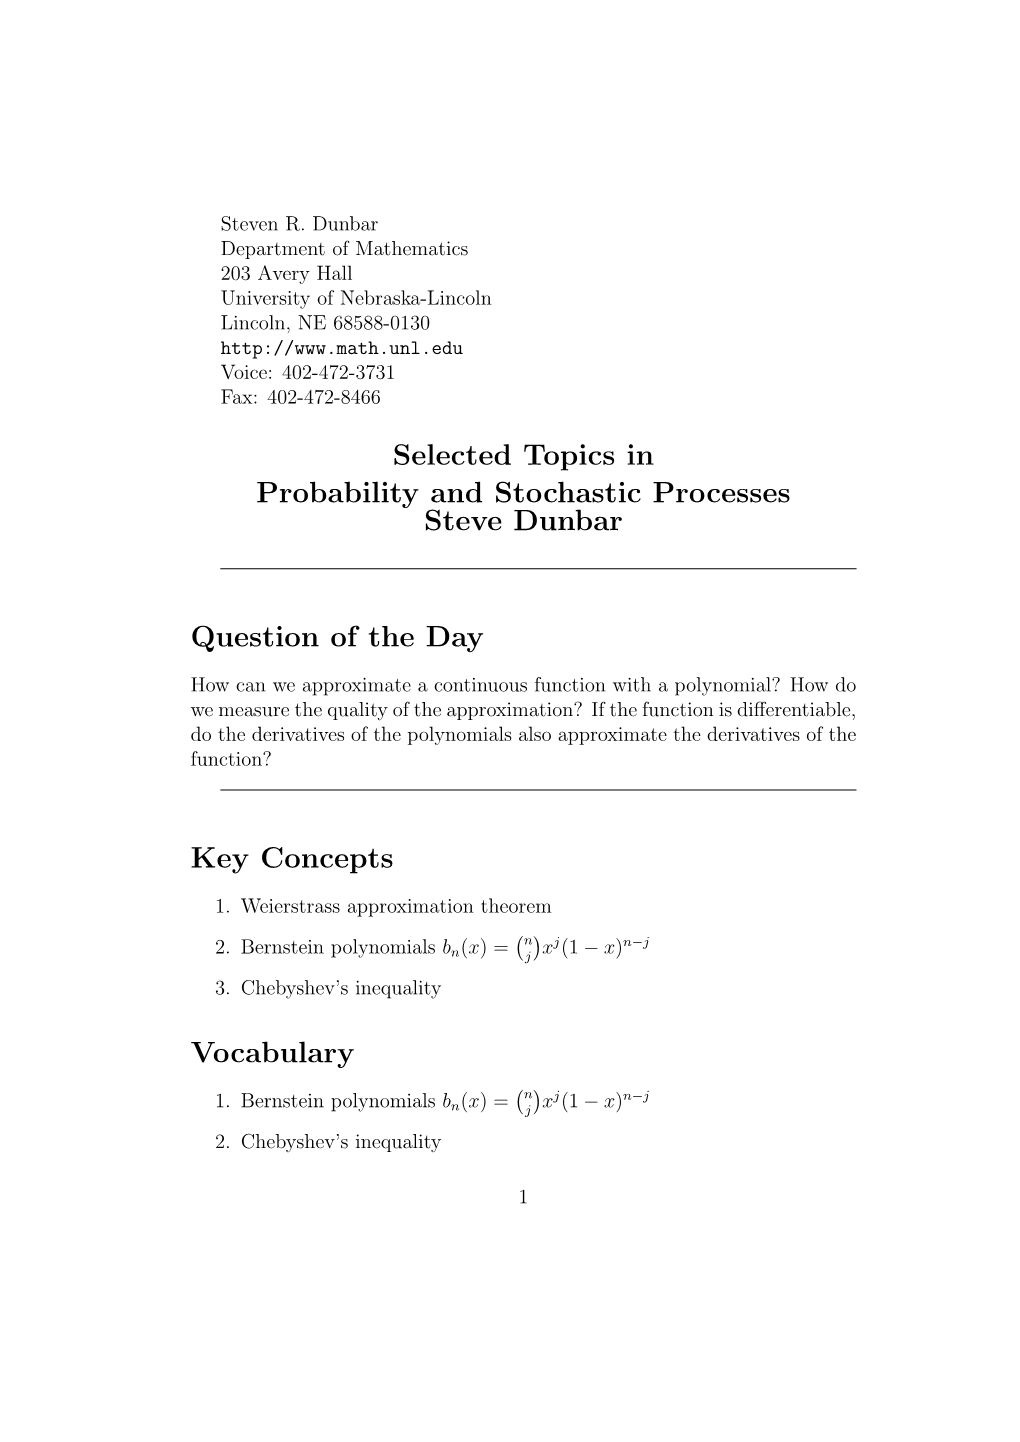 Selected Topics in Probability and Stochastic Processes Steve Dunbar